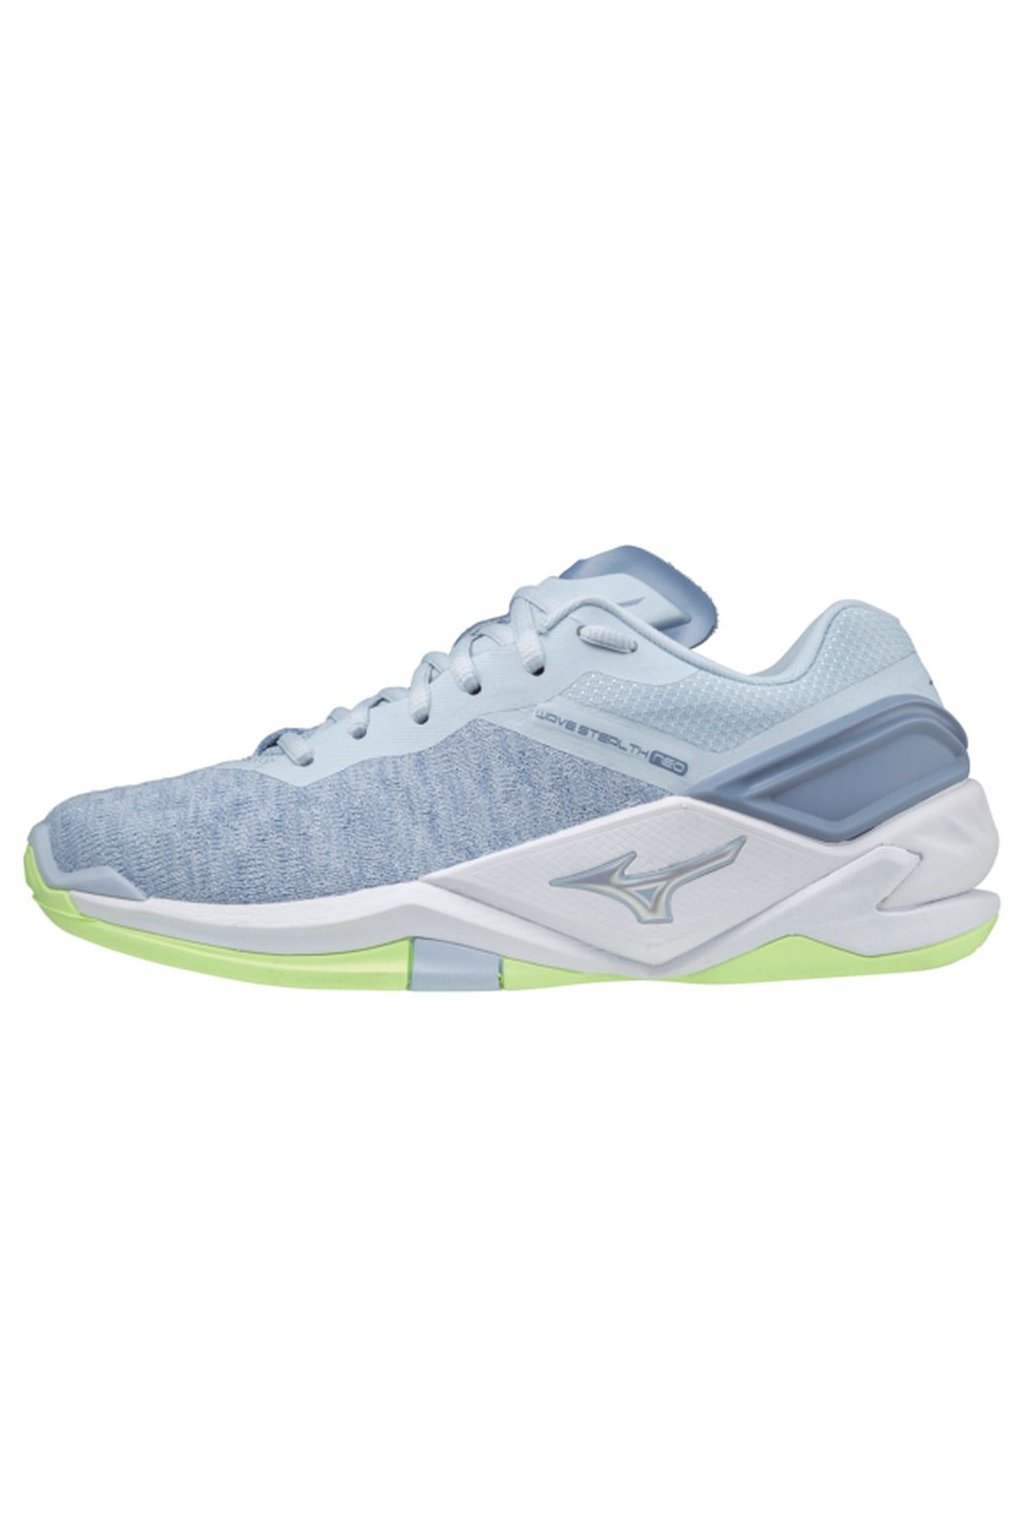 wave stealth neo heather white neo lime 43 0 9 0